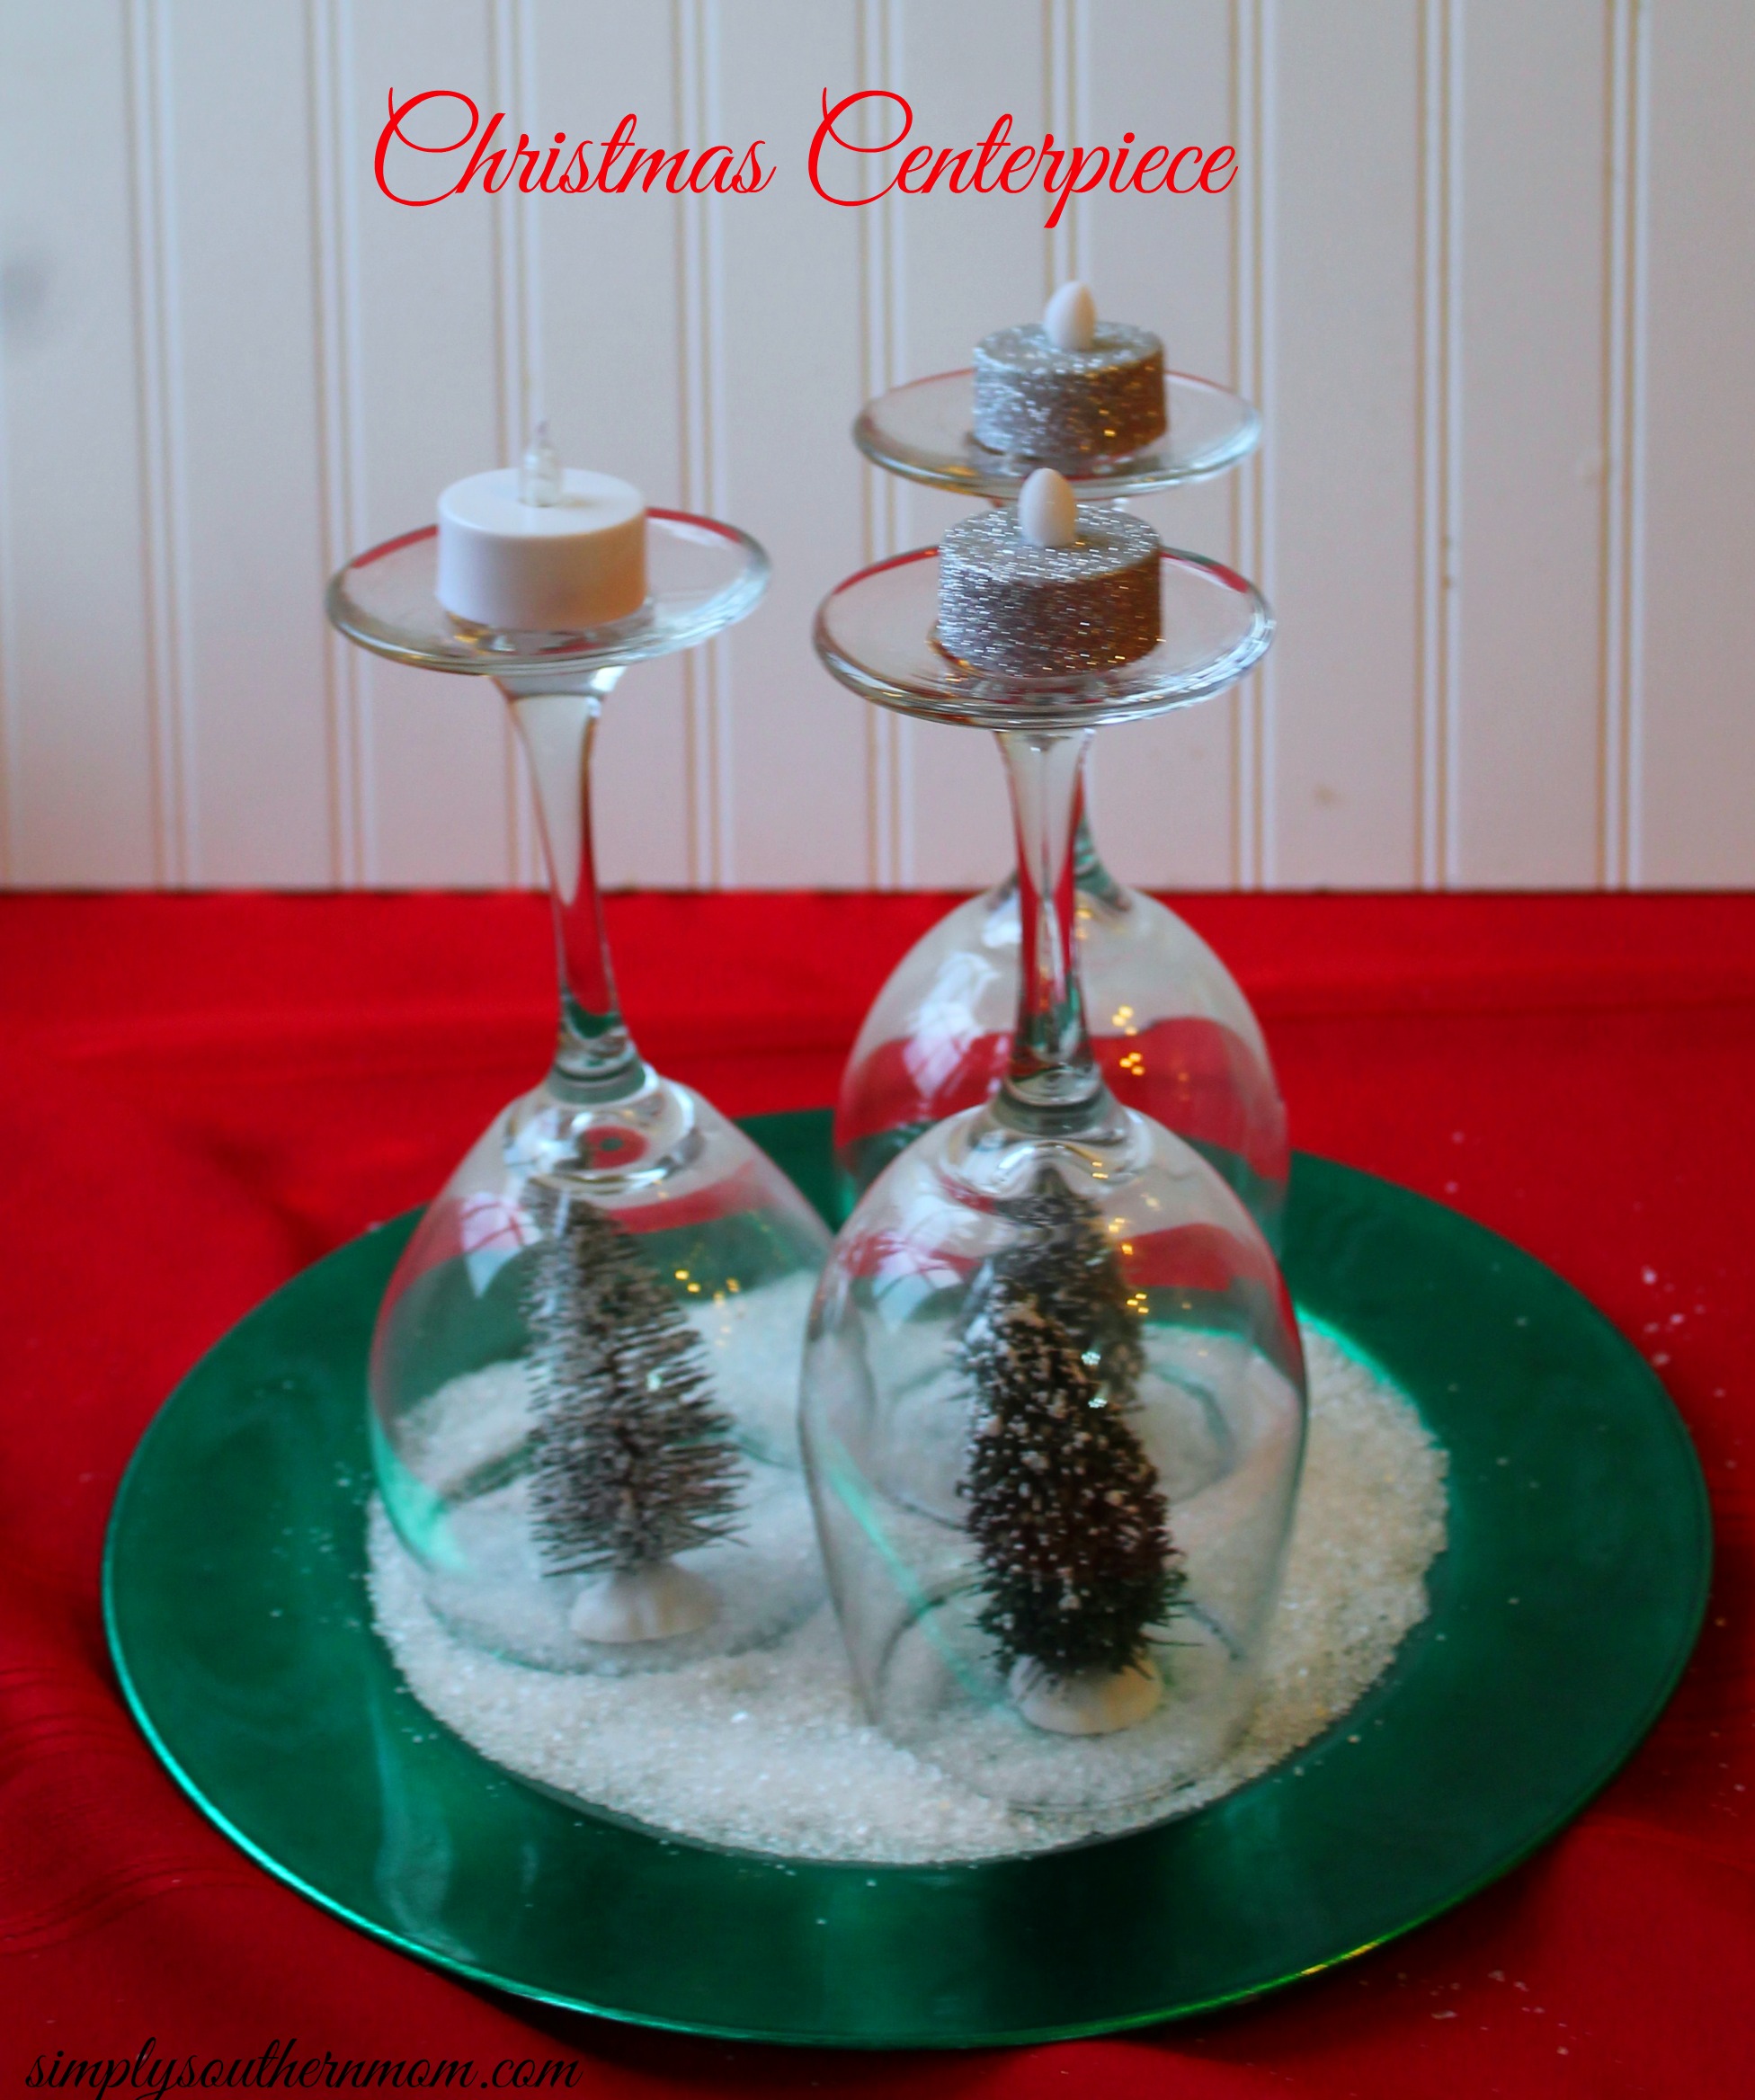 How to Make A Simple Holiday Tree Christmas Centerpiece - Simply ...